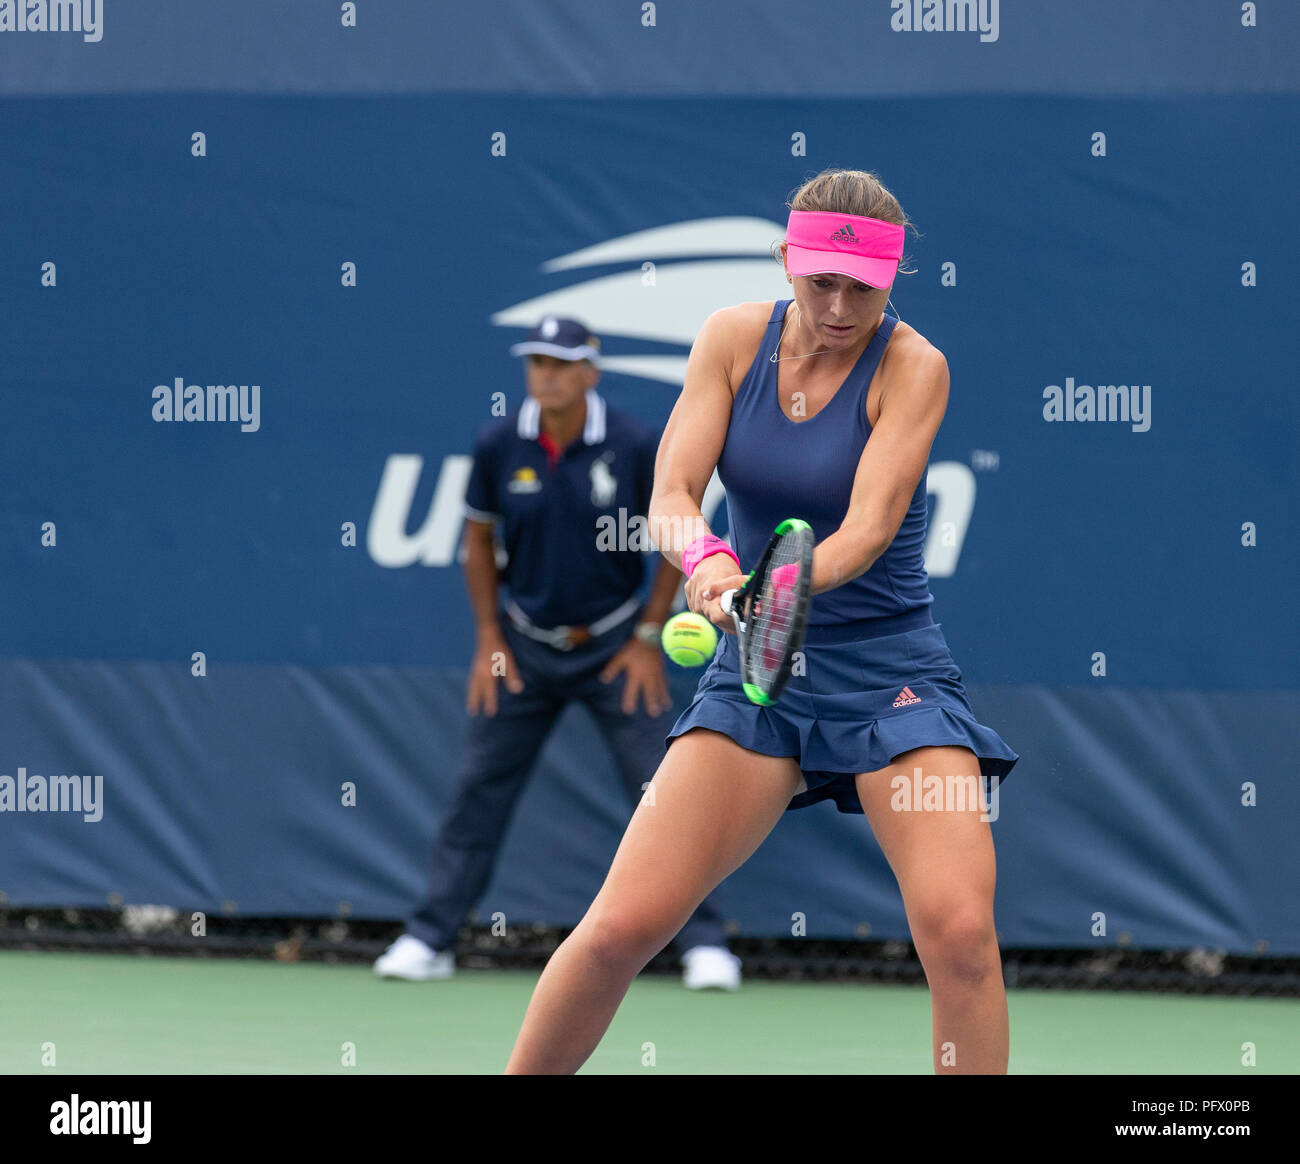 Paula Badosa Gibert of Spain retruns ball during qualifying day 1 against Sophie Chang of USA at US Open Tennis championship at USTA Billie Jean King National Tennis Center (Photo by Lev Radin/Pacific Press) Stock Photo